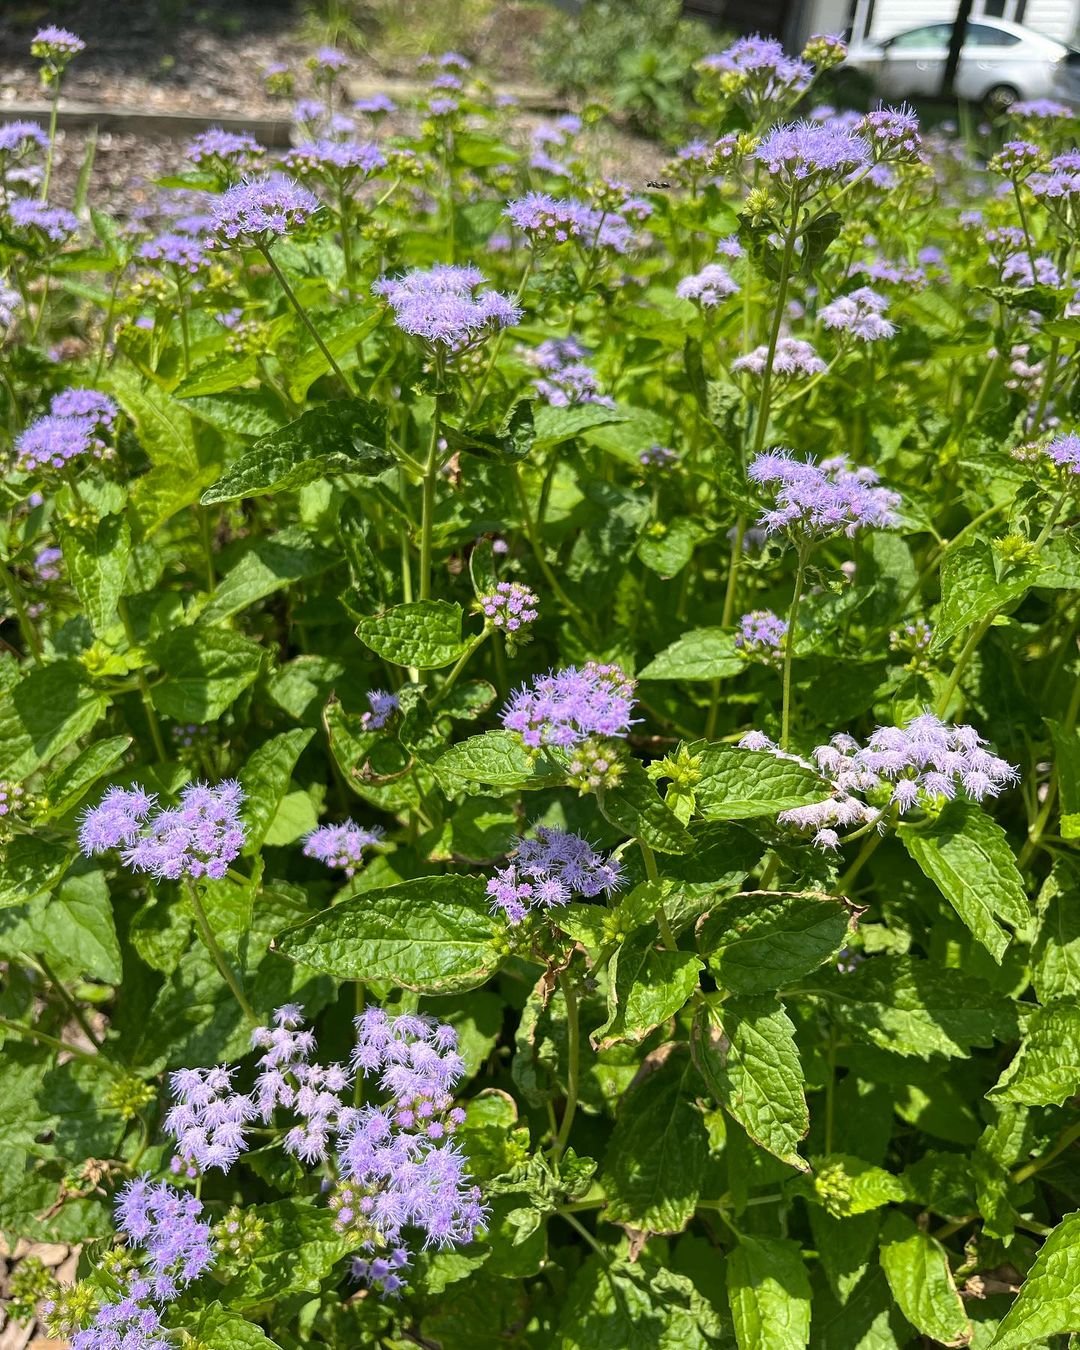 Blue Mistflower featuring vibrant purple blooms and lush green foliage.